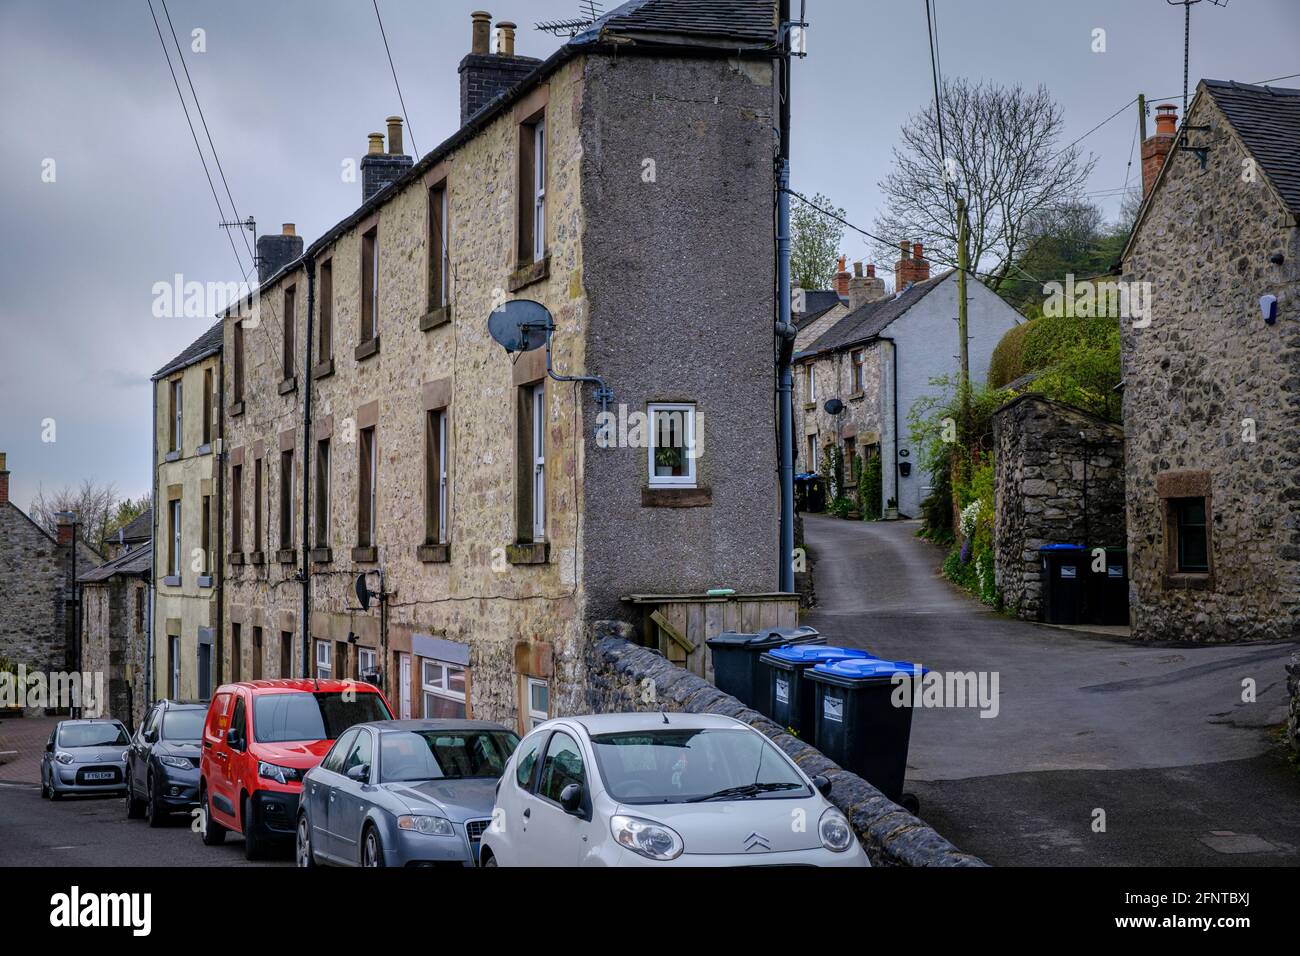 A narrow house on the corner terrace at the junction of Main Street and The Alley, Middleton, Derbyshire Stock Photo